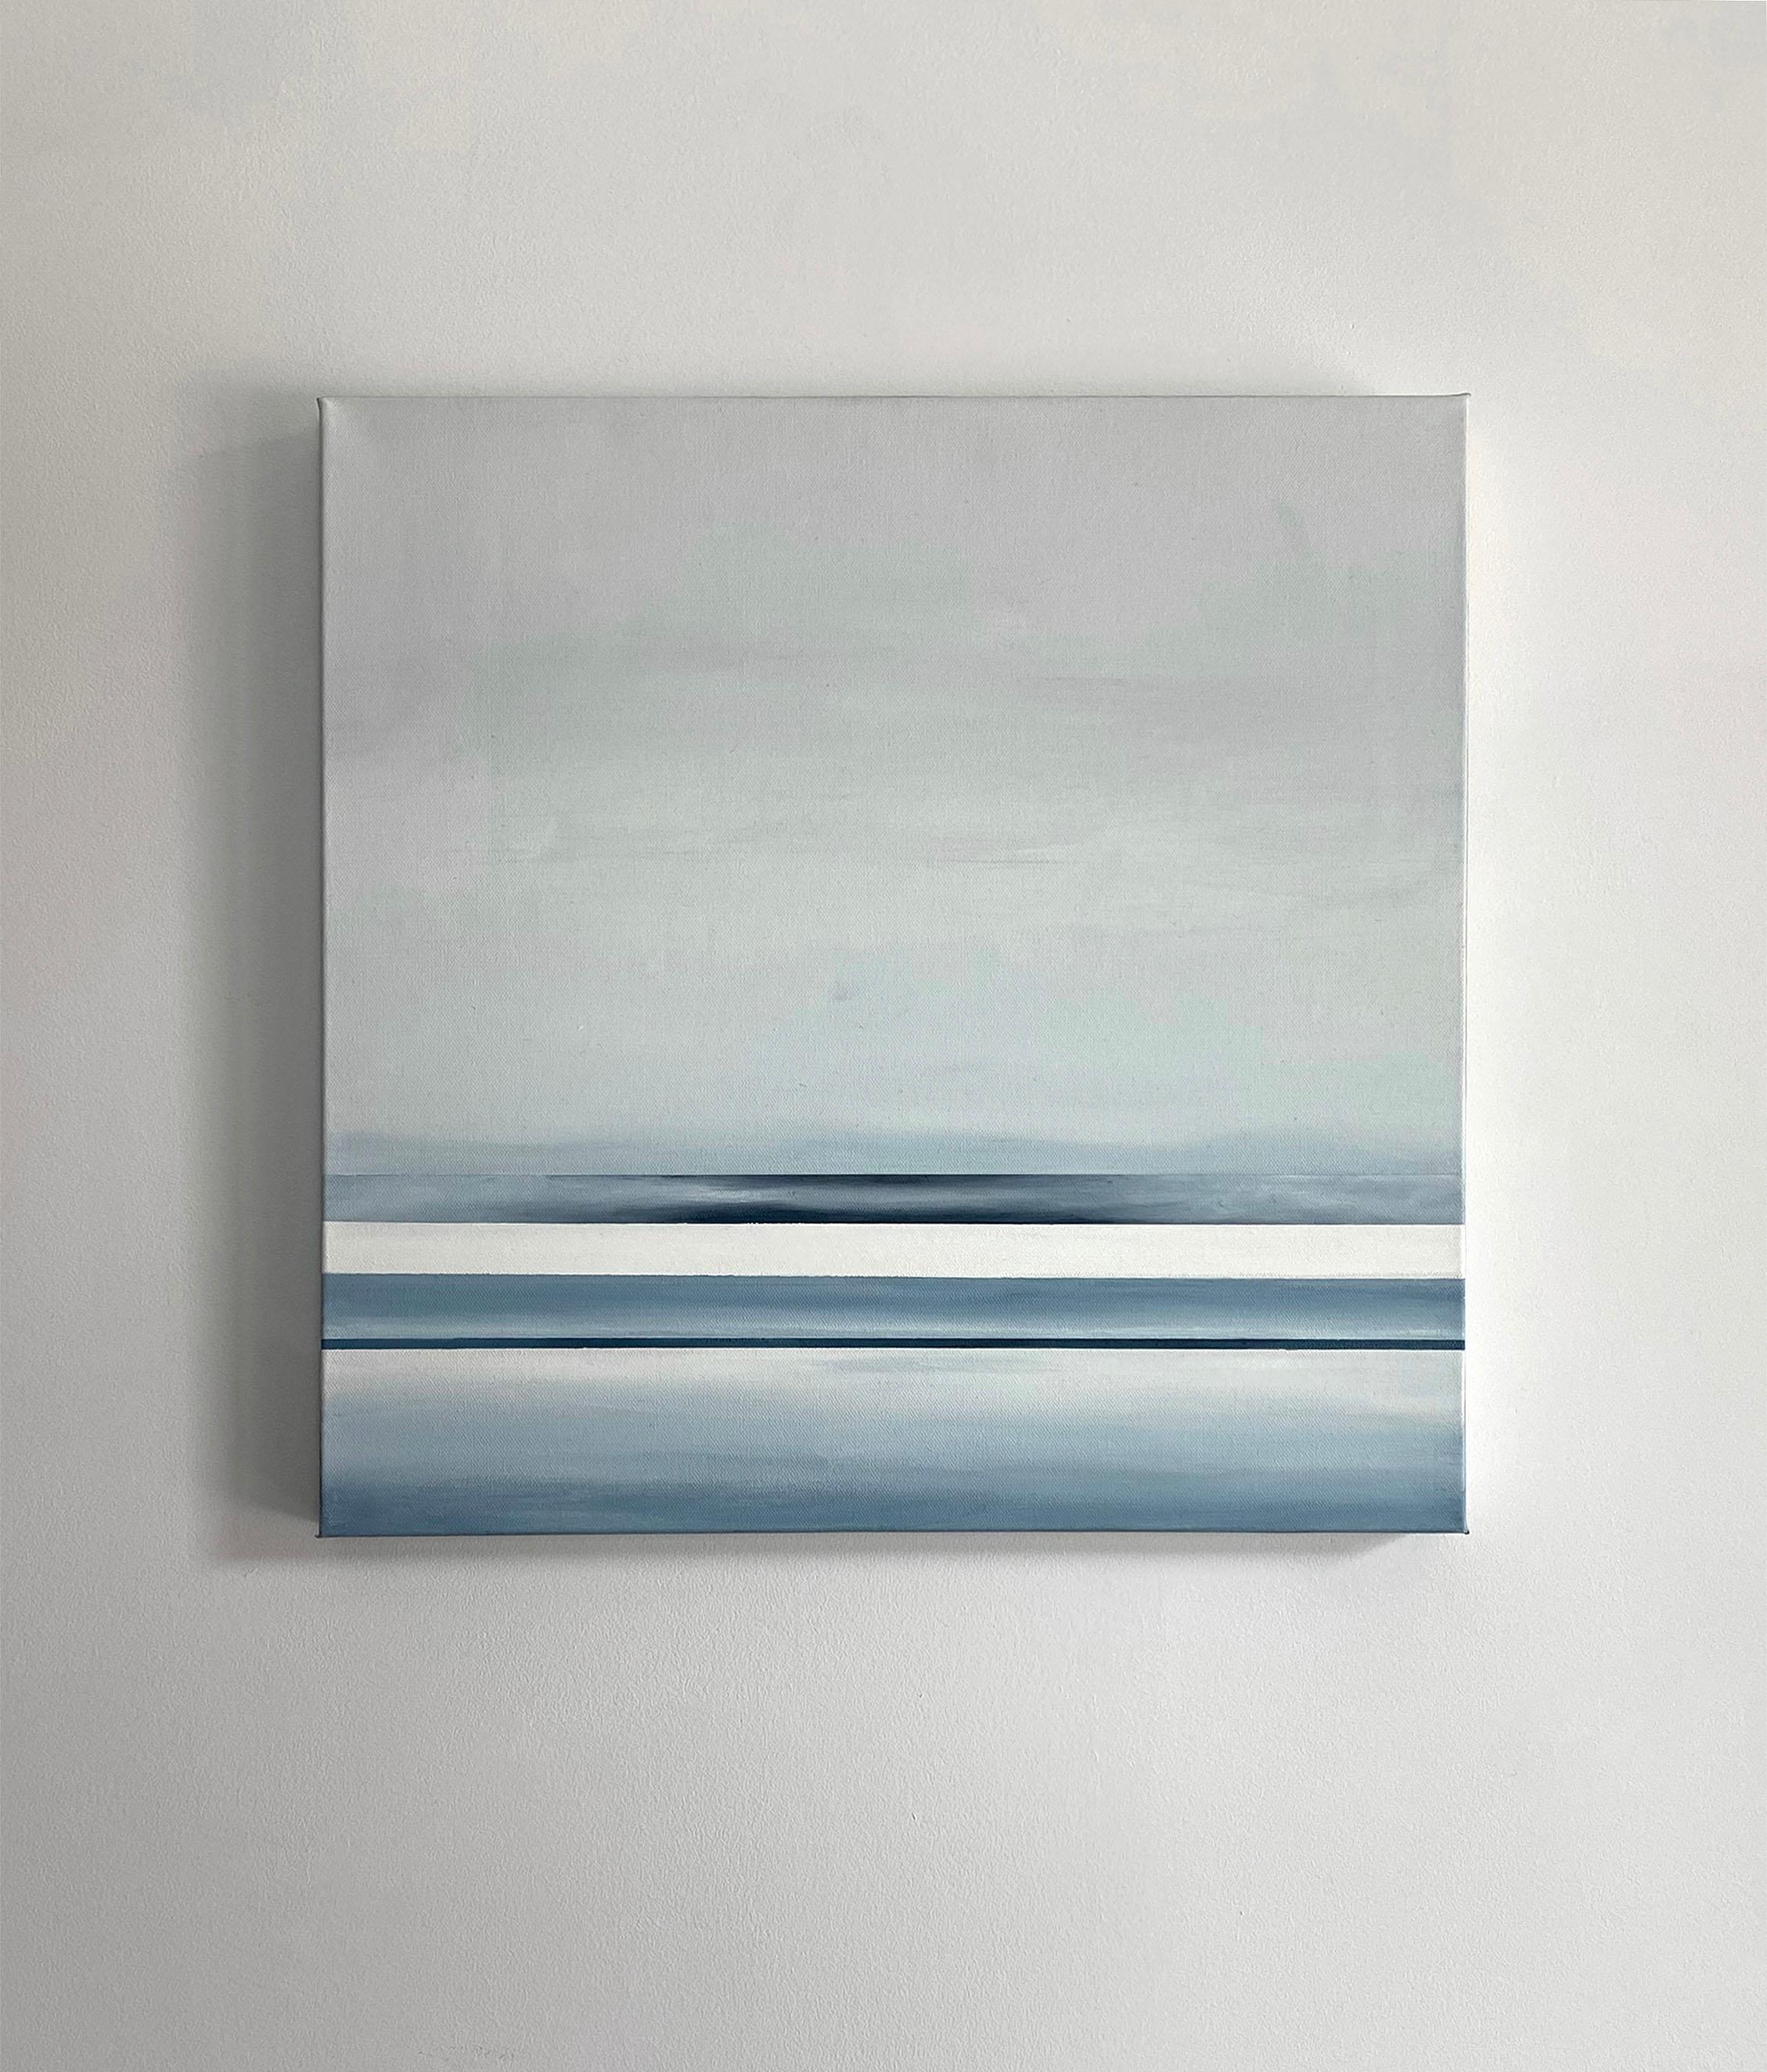 This small original abstract painting by Tony Iadicicco is made with oil paint on gallery wrapped canvas. Four dark blue and grey horizontal parallel lines are grouped in pairs and located on the bottom portion of the composition, with white between